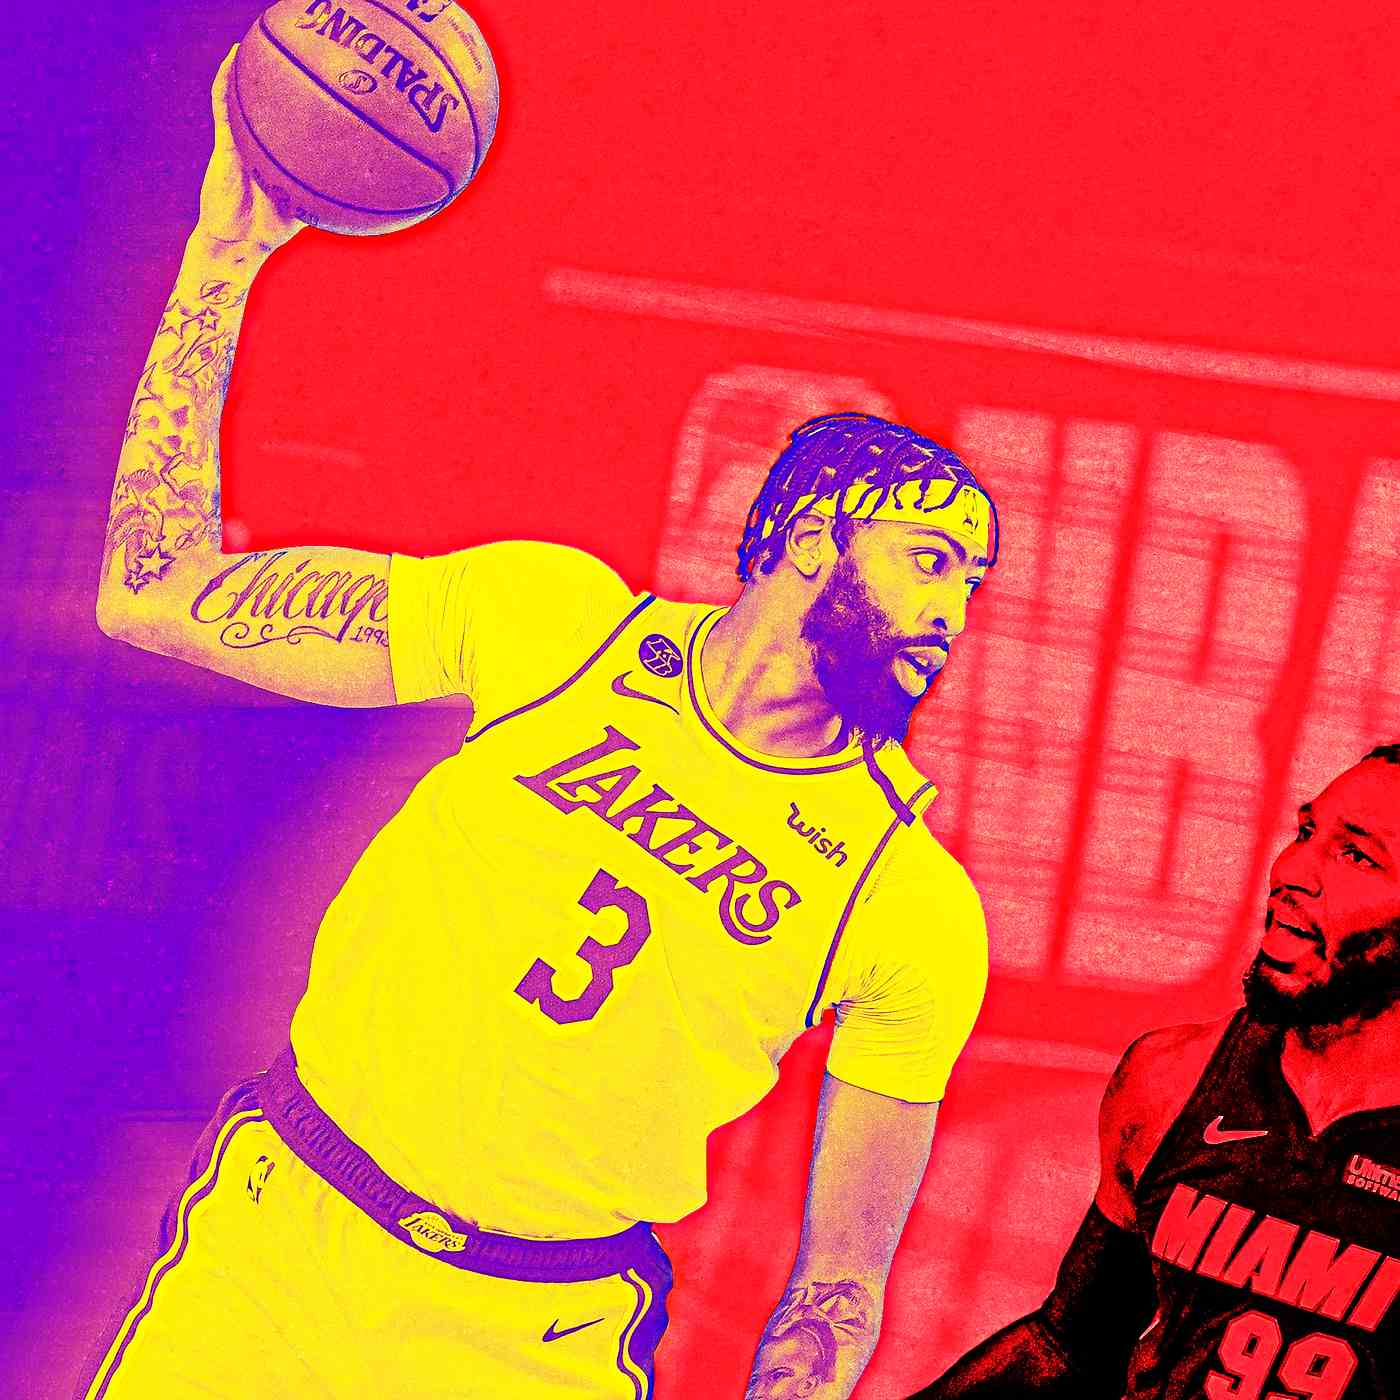 Time Has Come for Anthony Davis to Be Lakers’ Small Ball Center Full Time